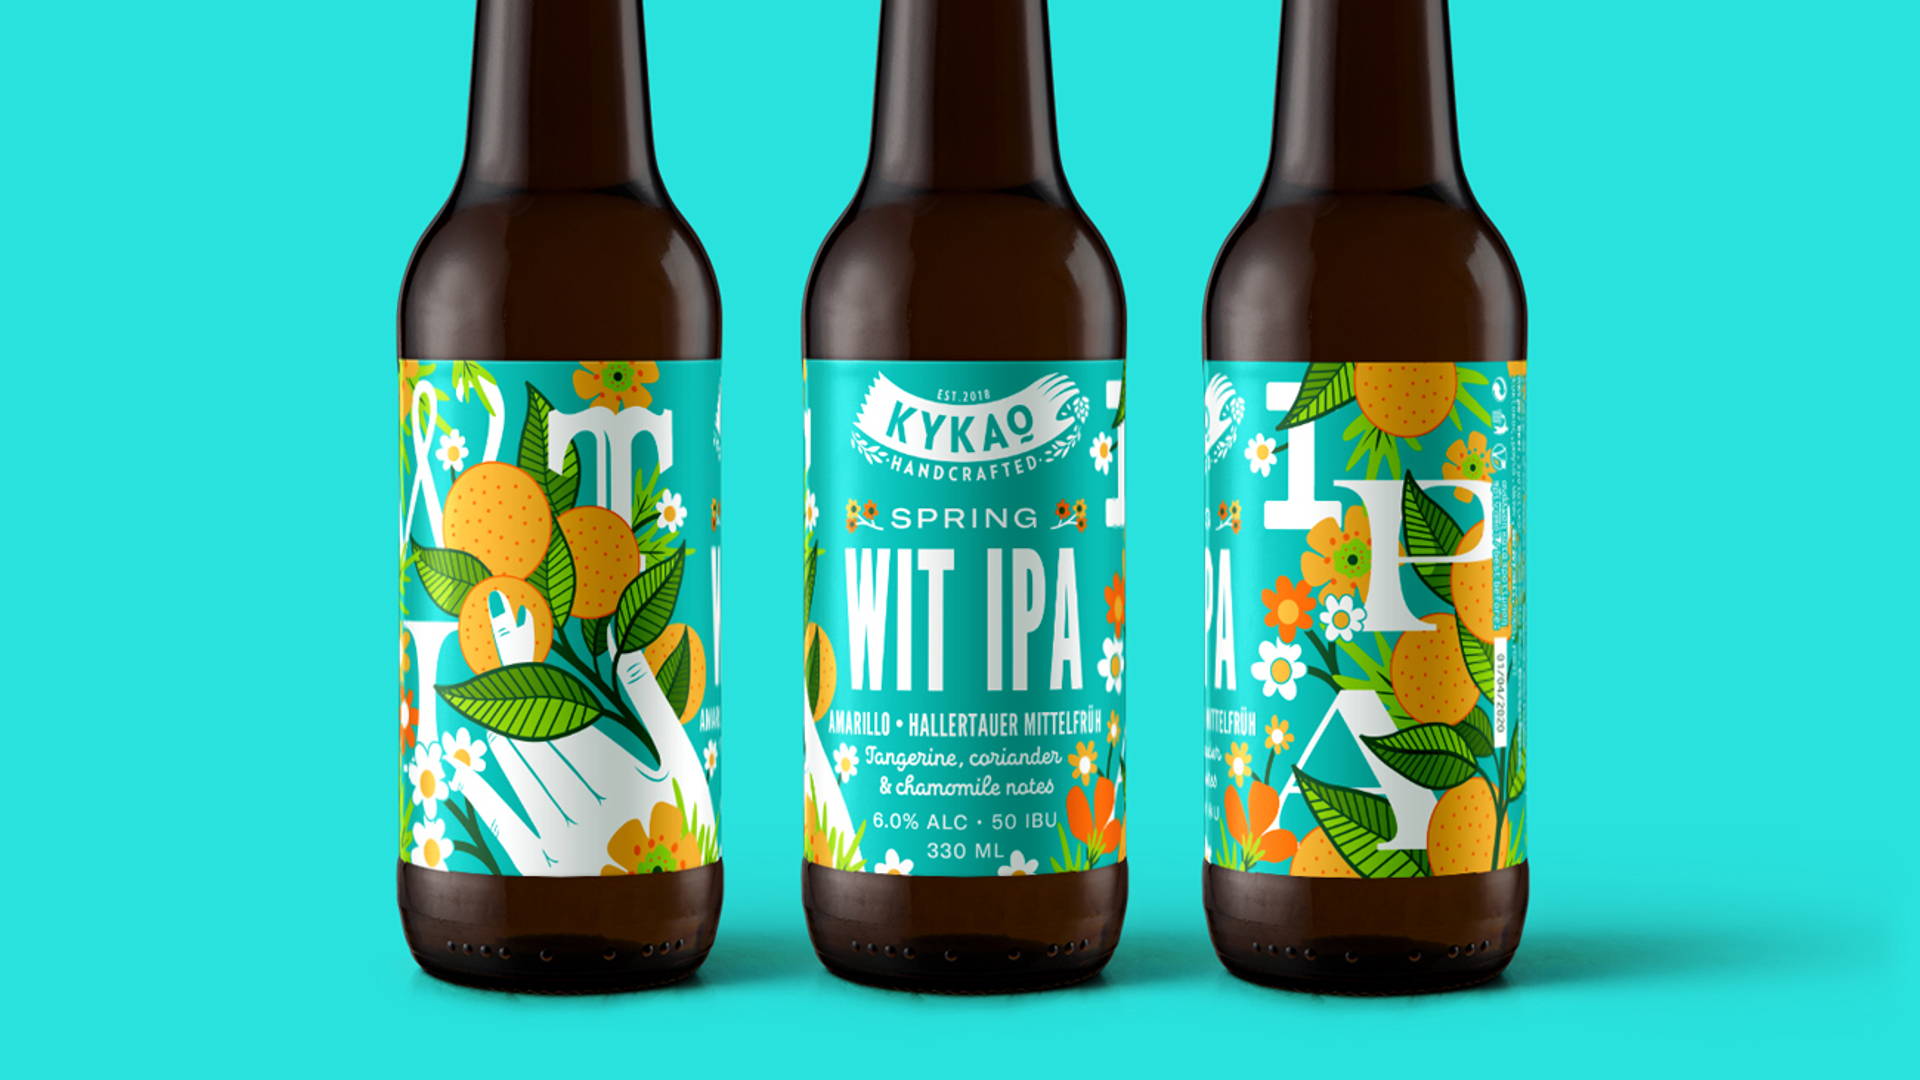 Featured image for This Greek Beer Combines Illustration and Typography in an Eye-Catching Way